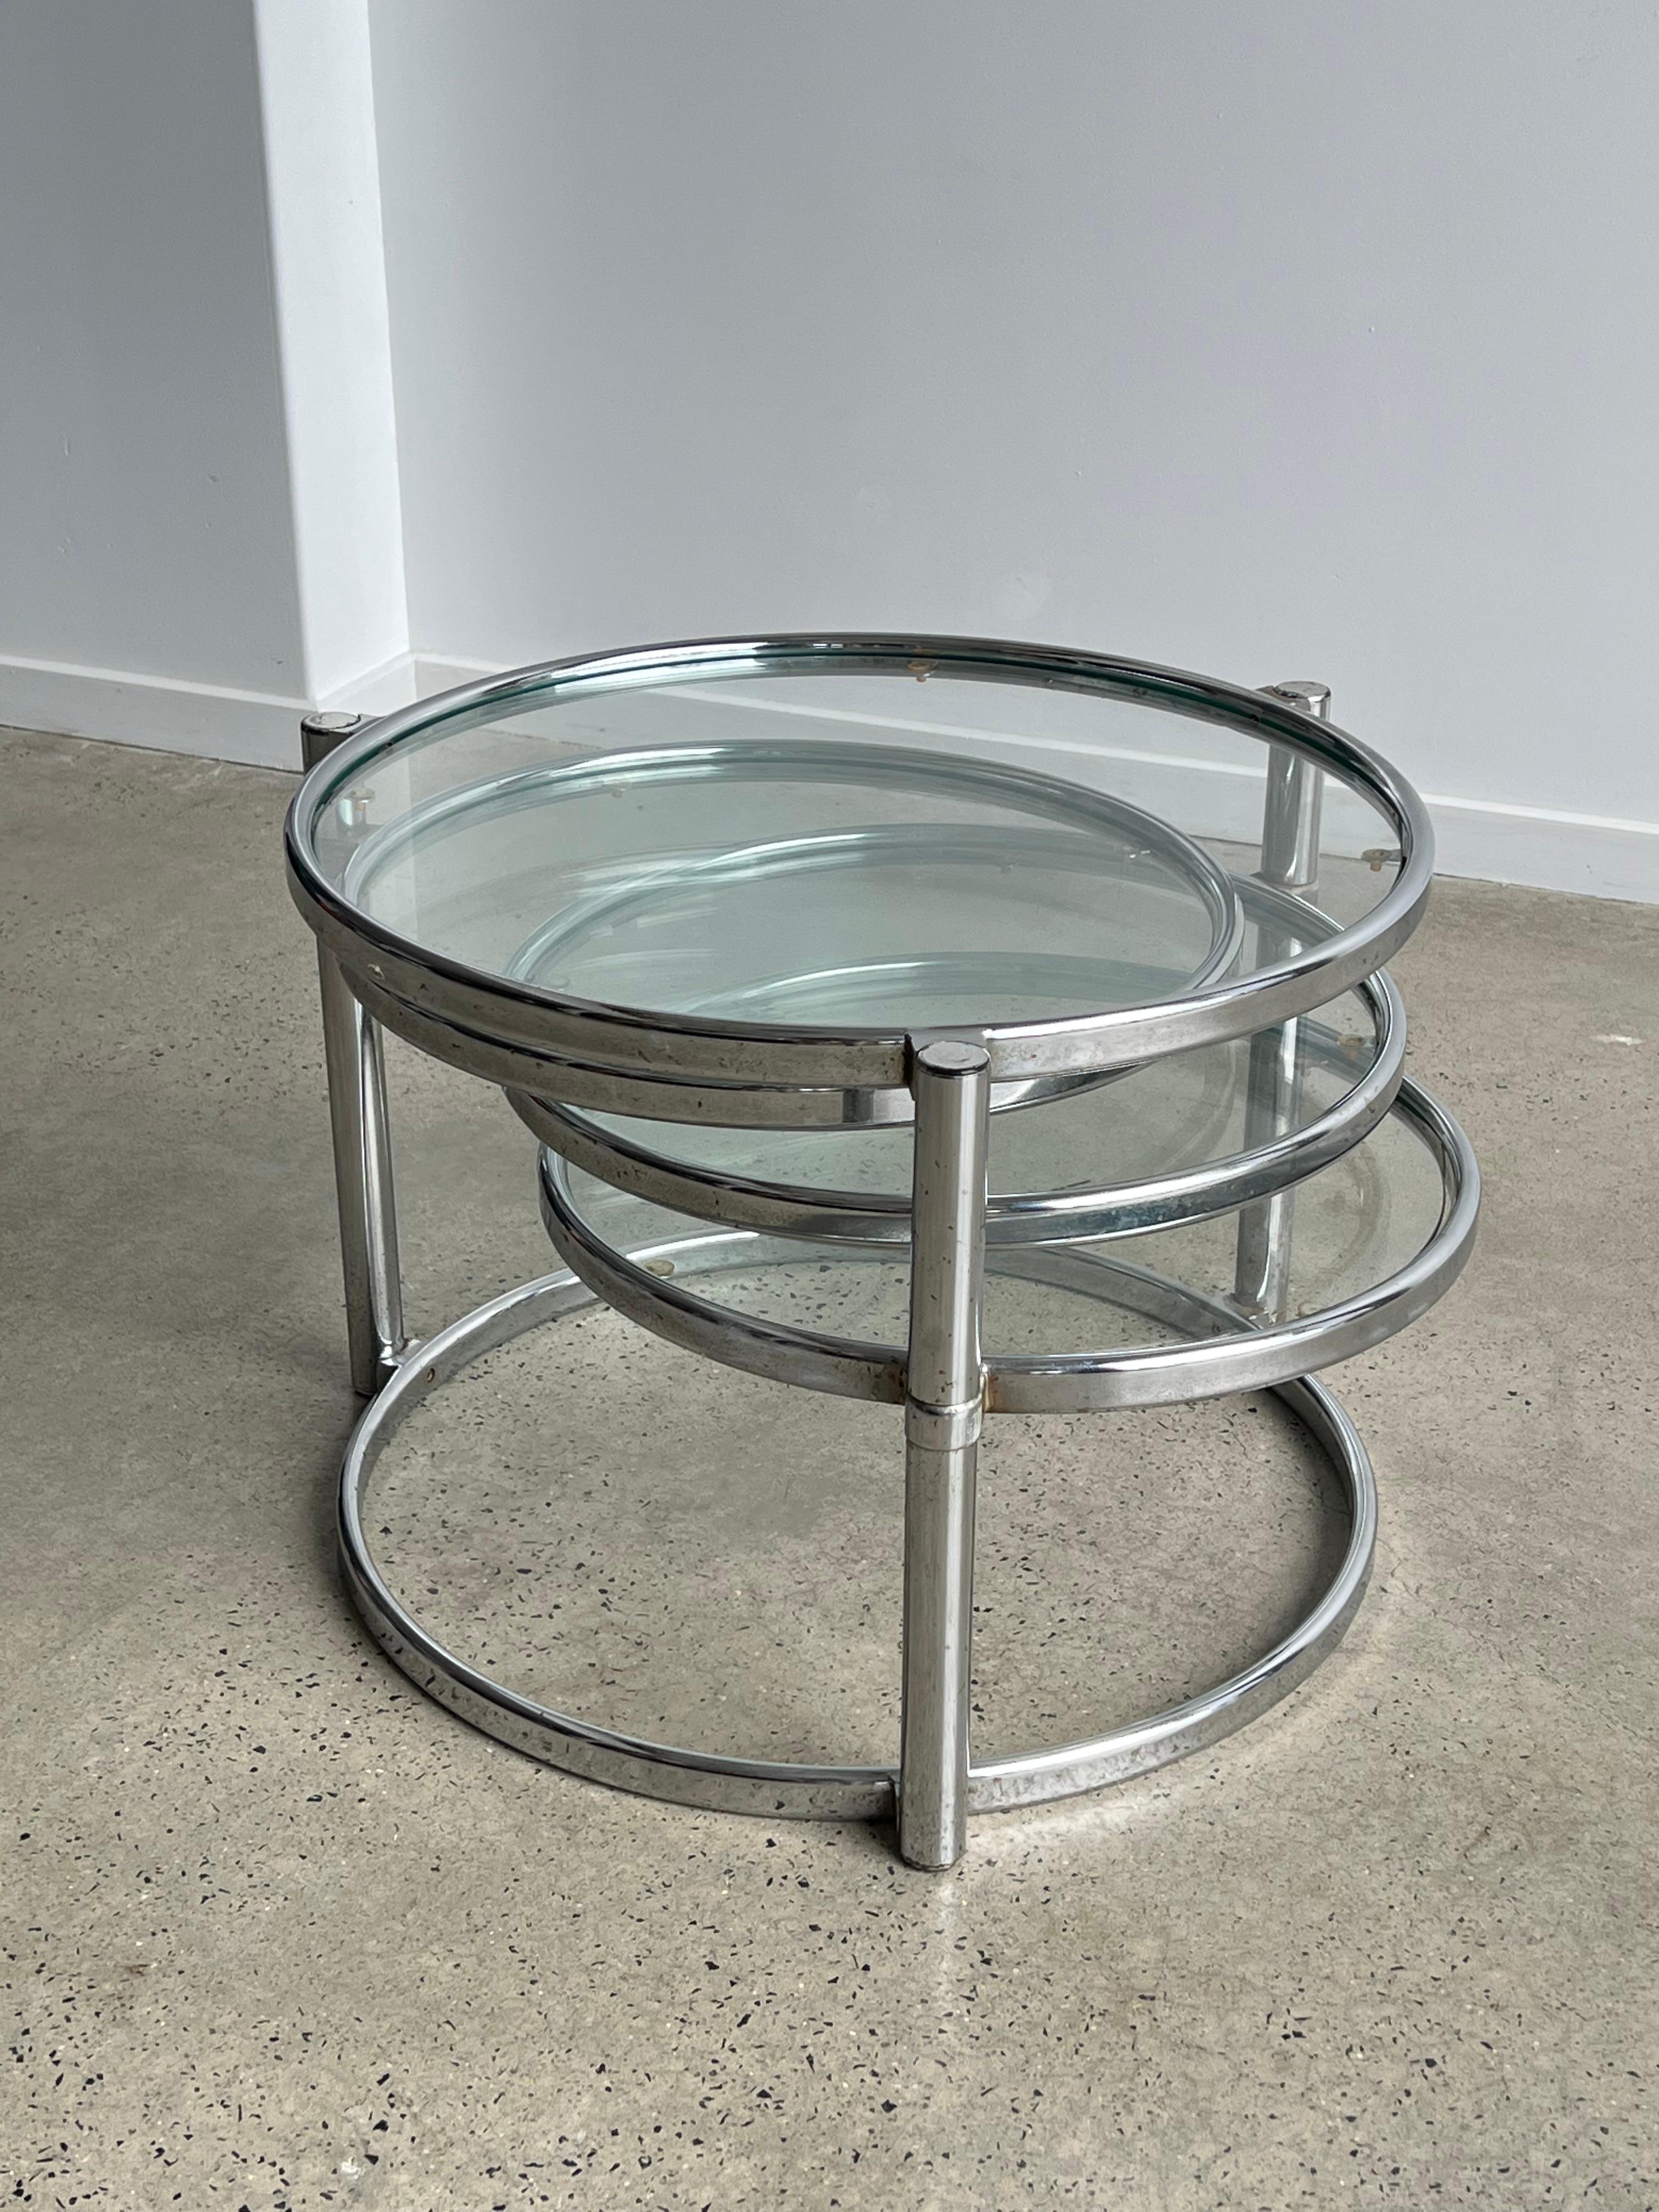 Mid-20th Century Italian Morex Convertible Coffee Table in Glass and Chrome 1970